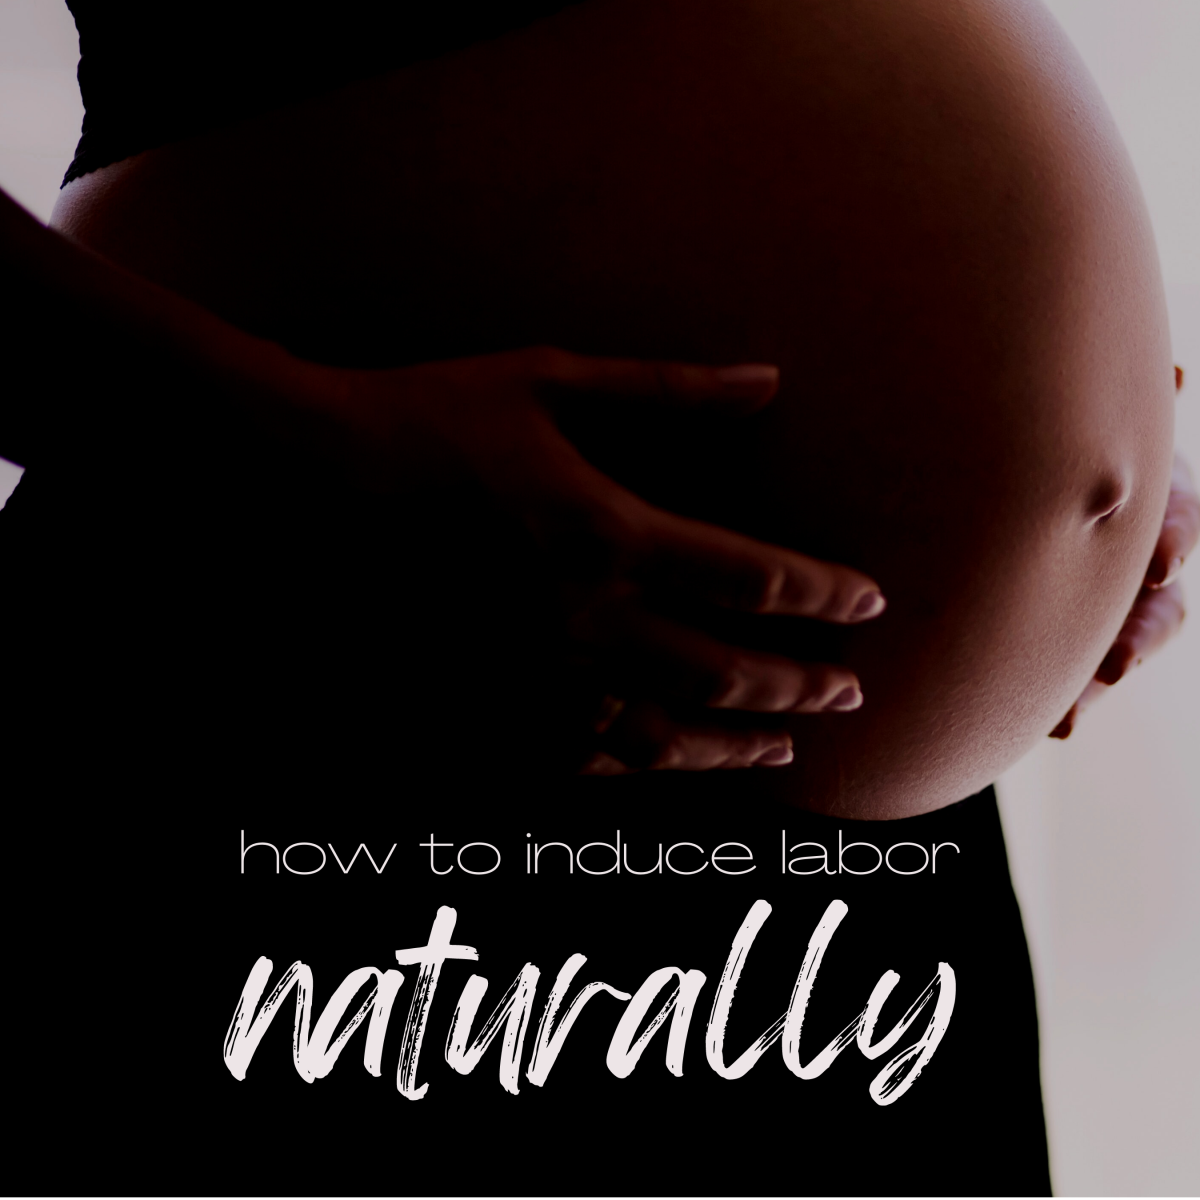 Ways to induce labor naturally.